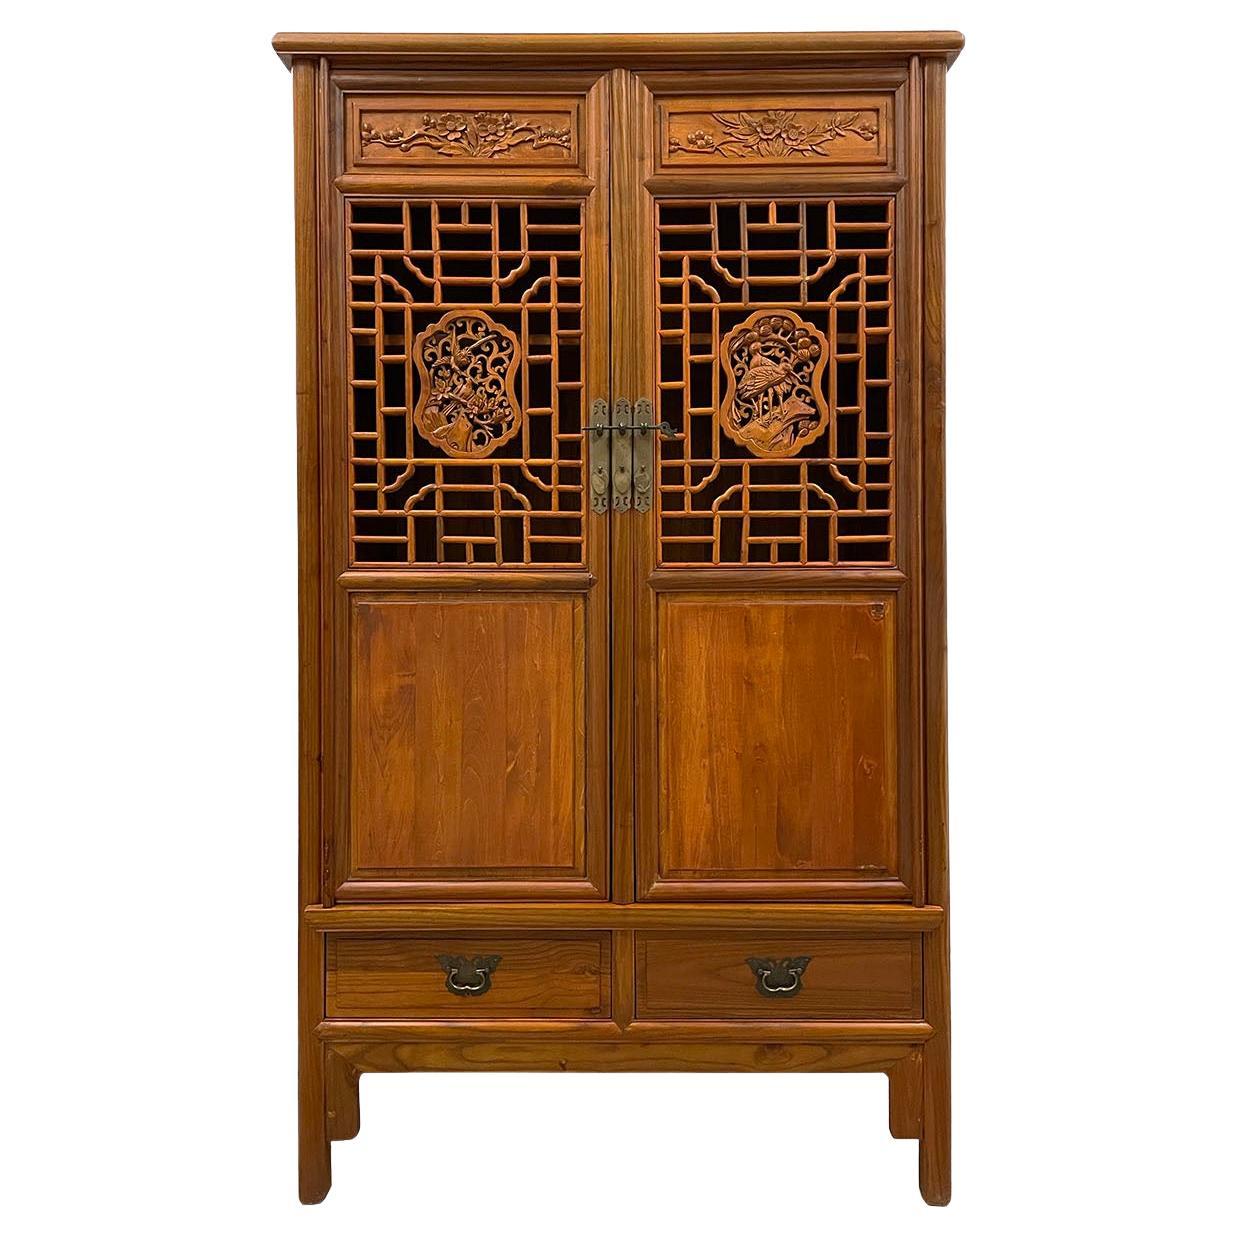 Vintage Chinese Carved Wooden Cabinet, Armoire, Wardrobe